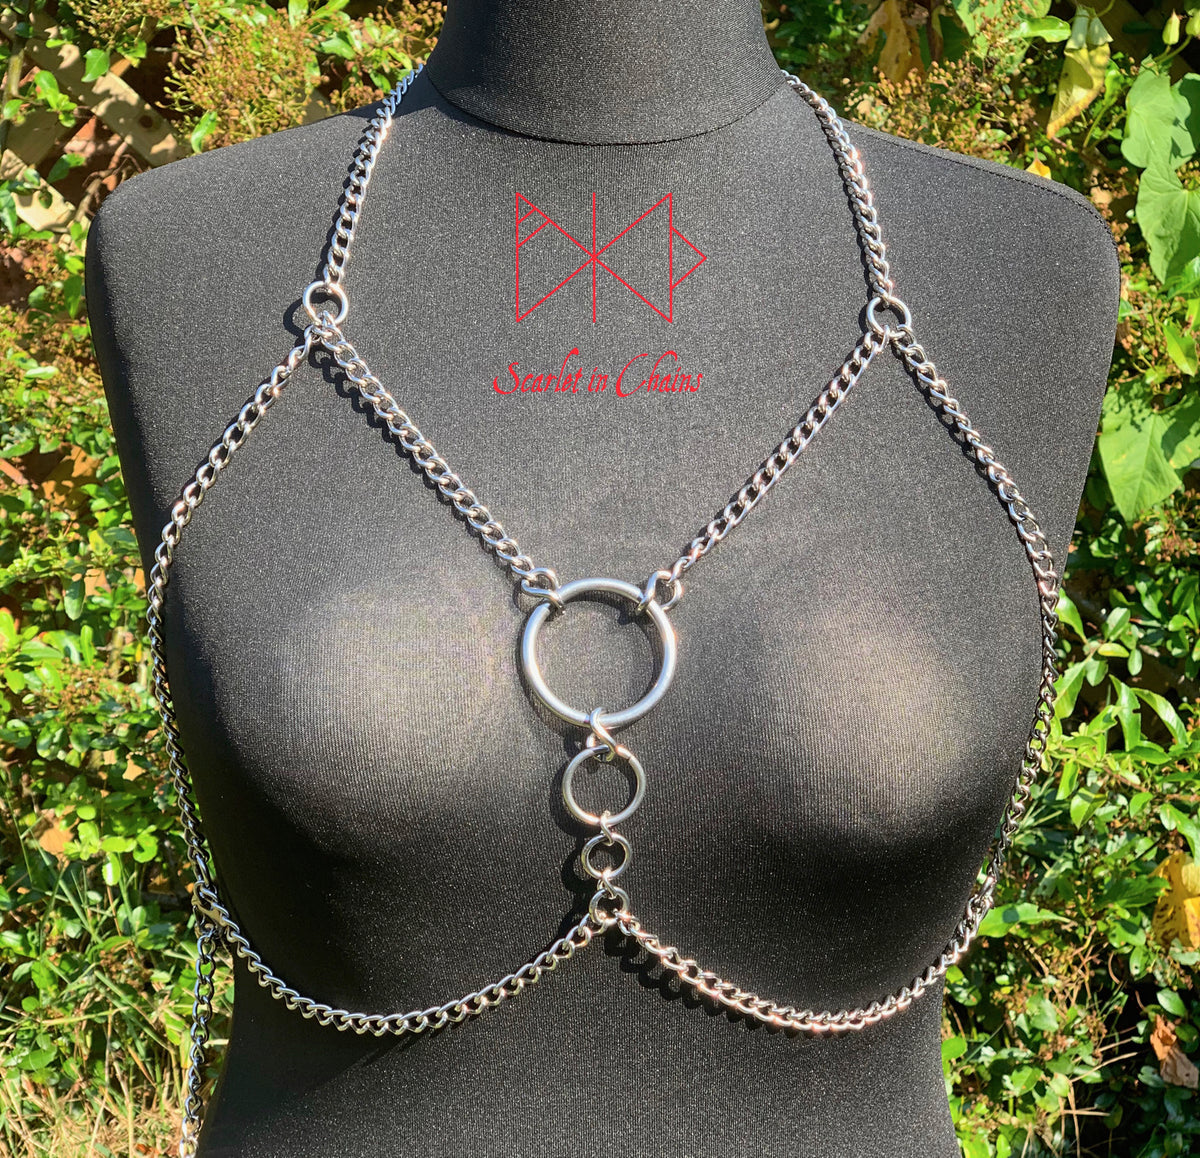 Luna-See: DIY: Another Chain Body Harness w/ Breast Plate